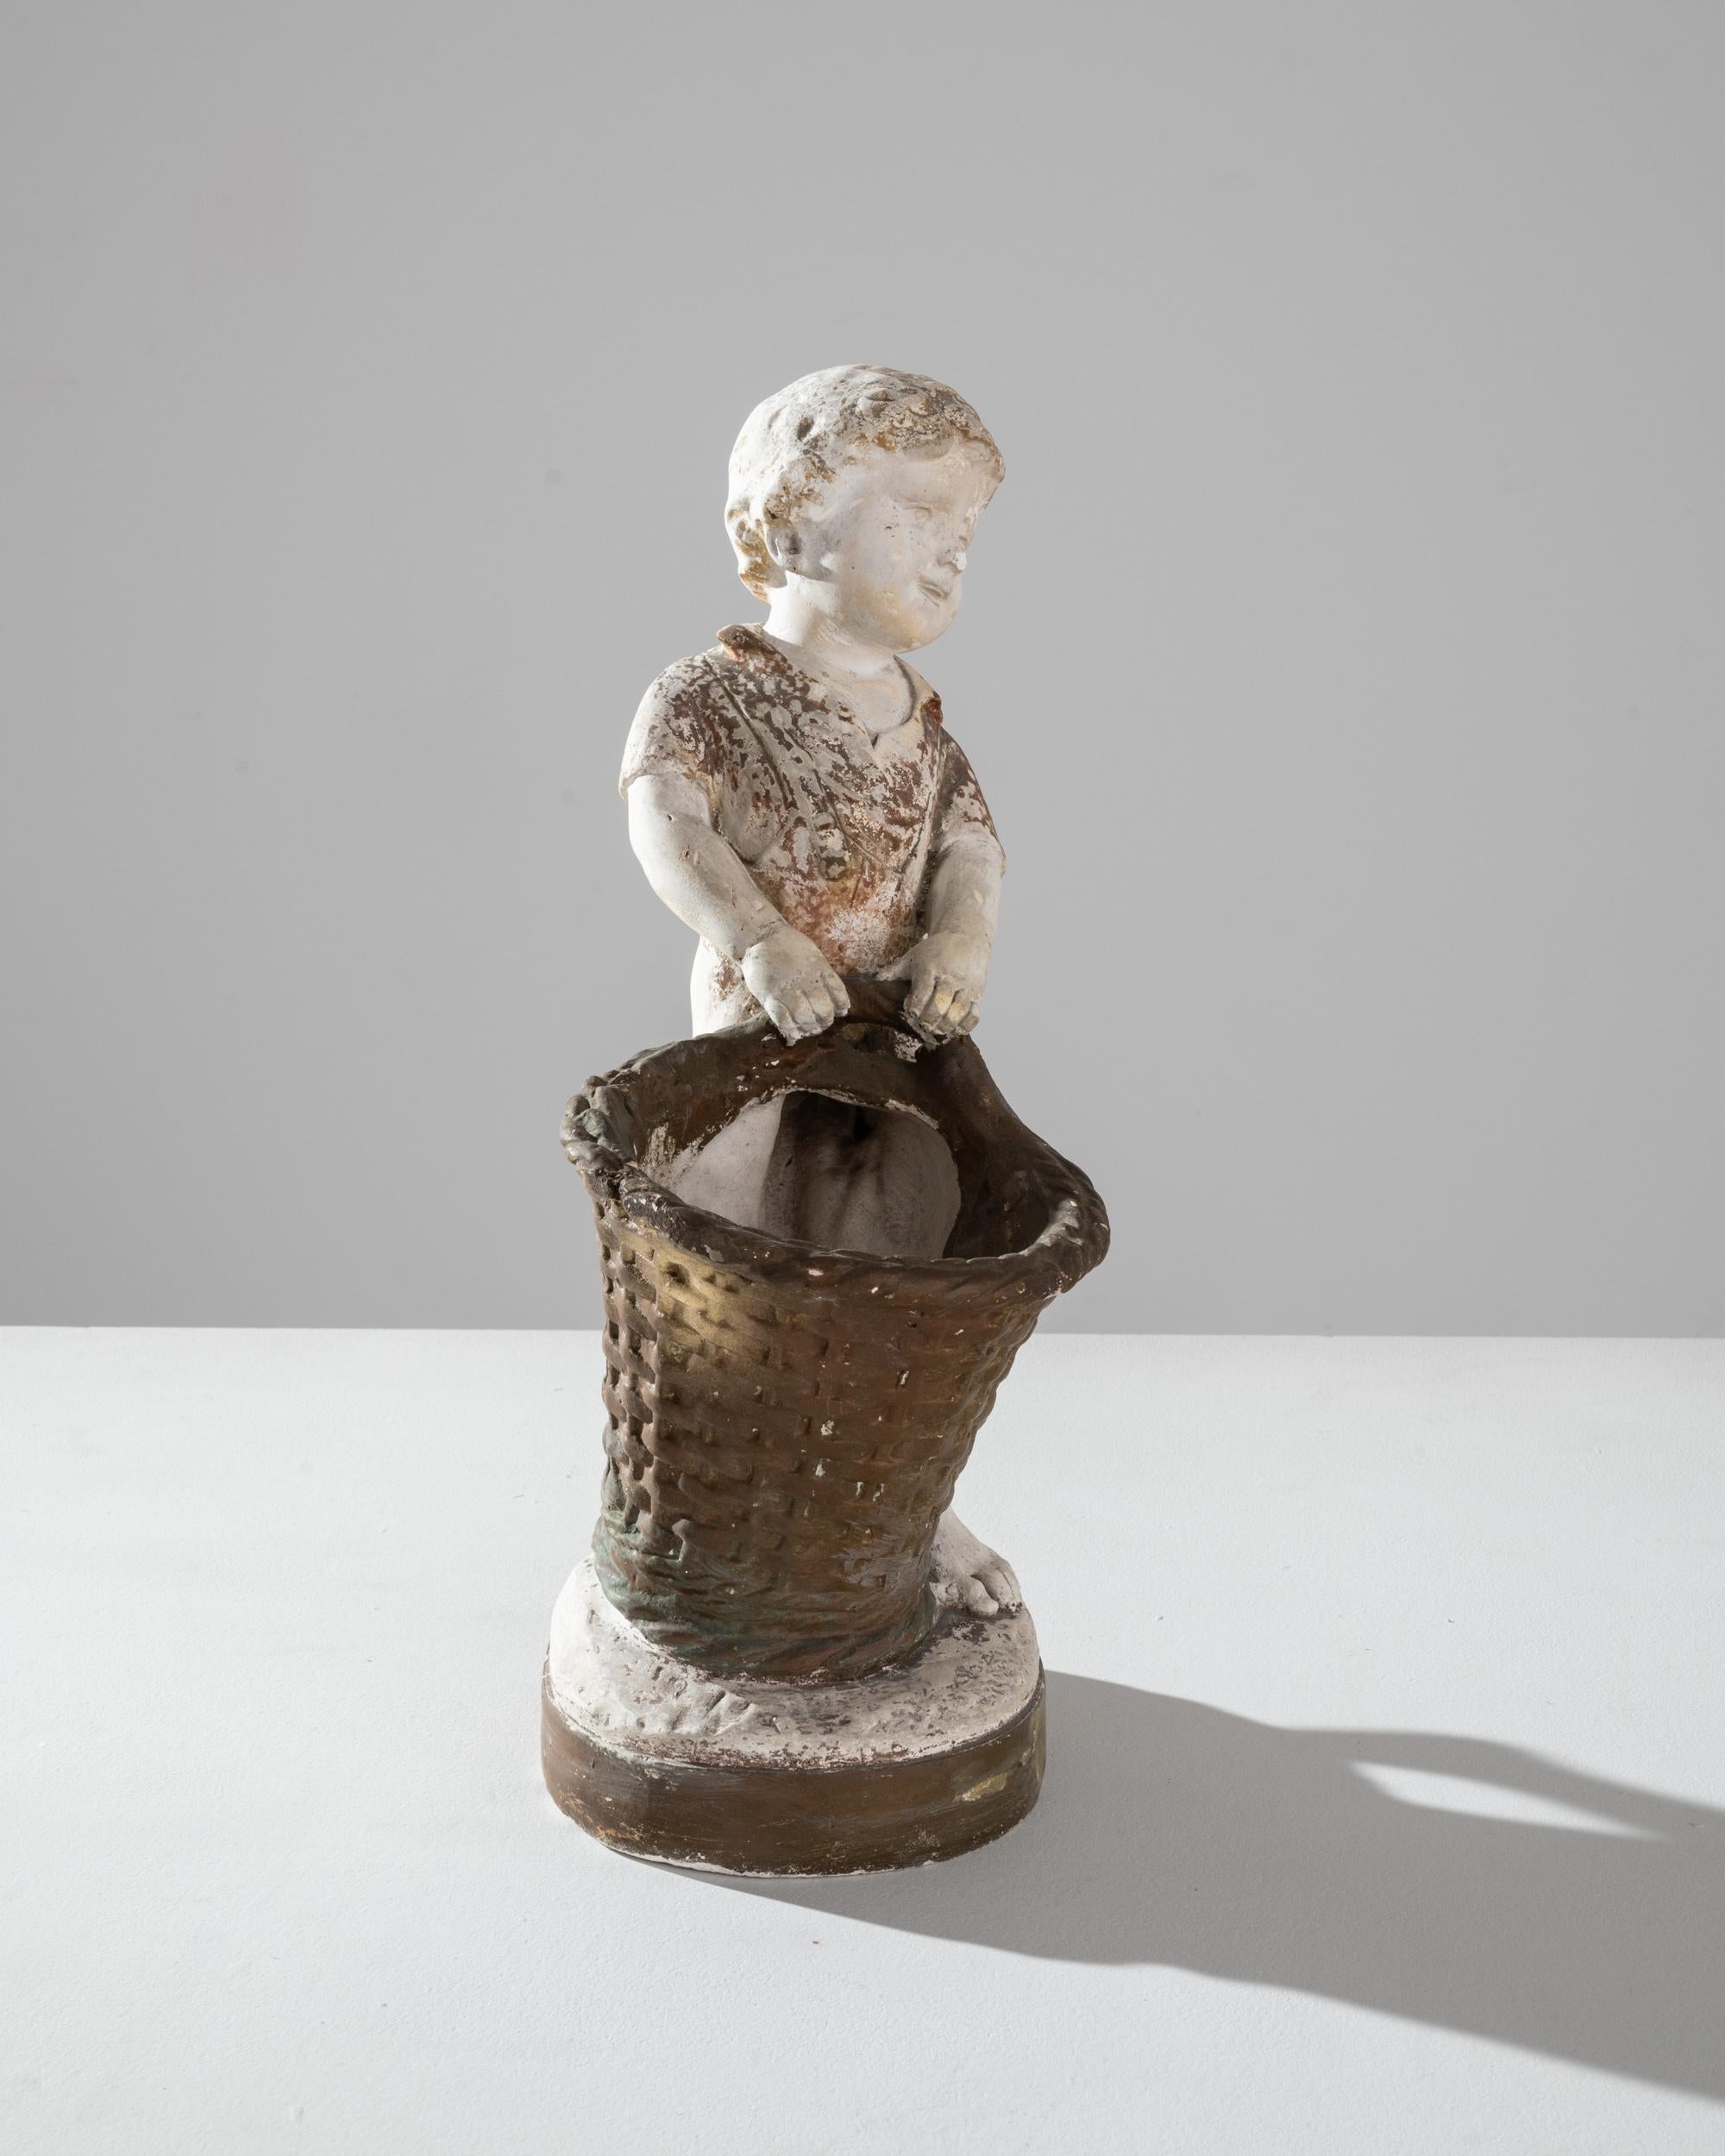 Transport your space to a bygone era with the charm of this 20th-century French Plaster Decoration. The sculpture captures the innocence of youth as it portrays a young boy elegantly bearing a wicker basket. Its antique allure is heightened by a